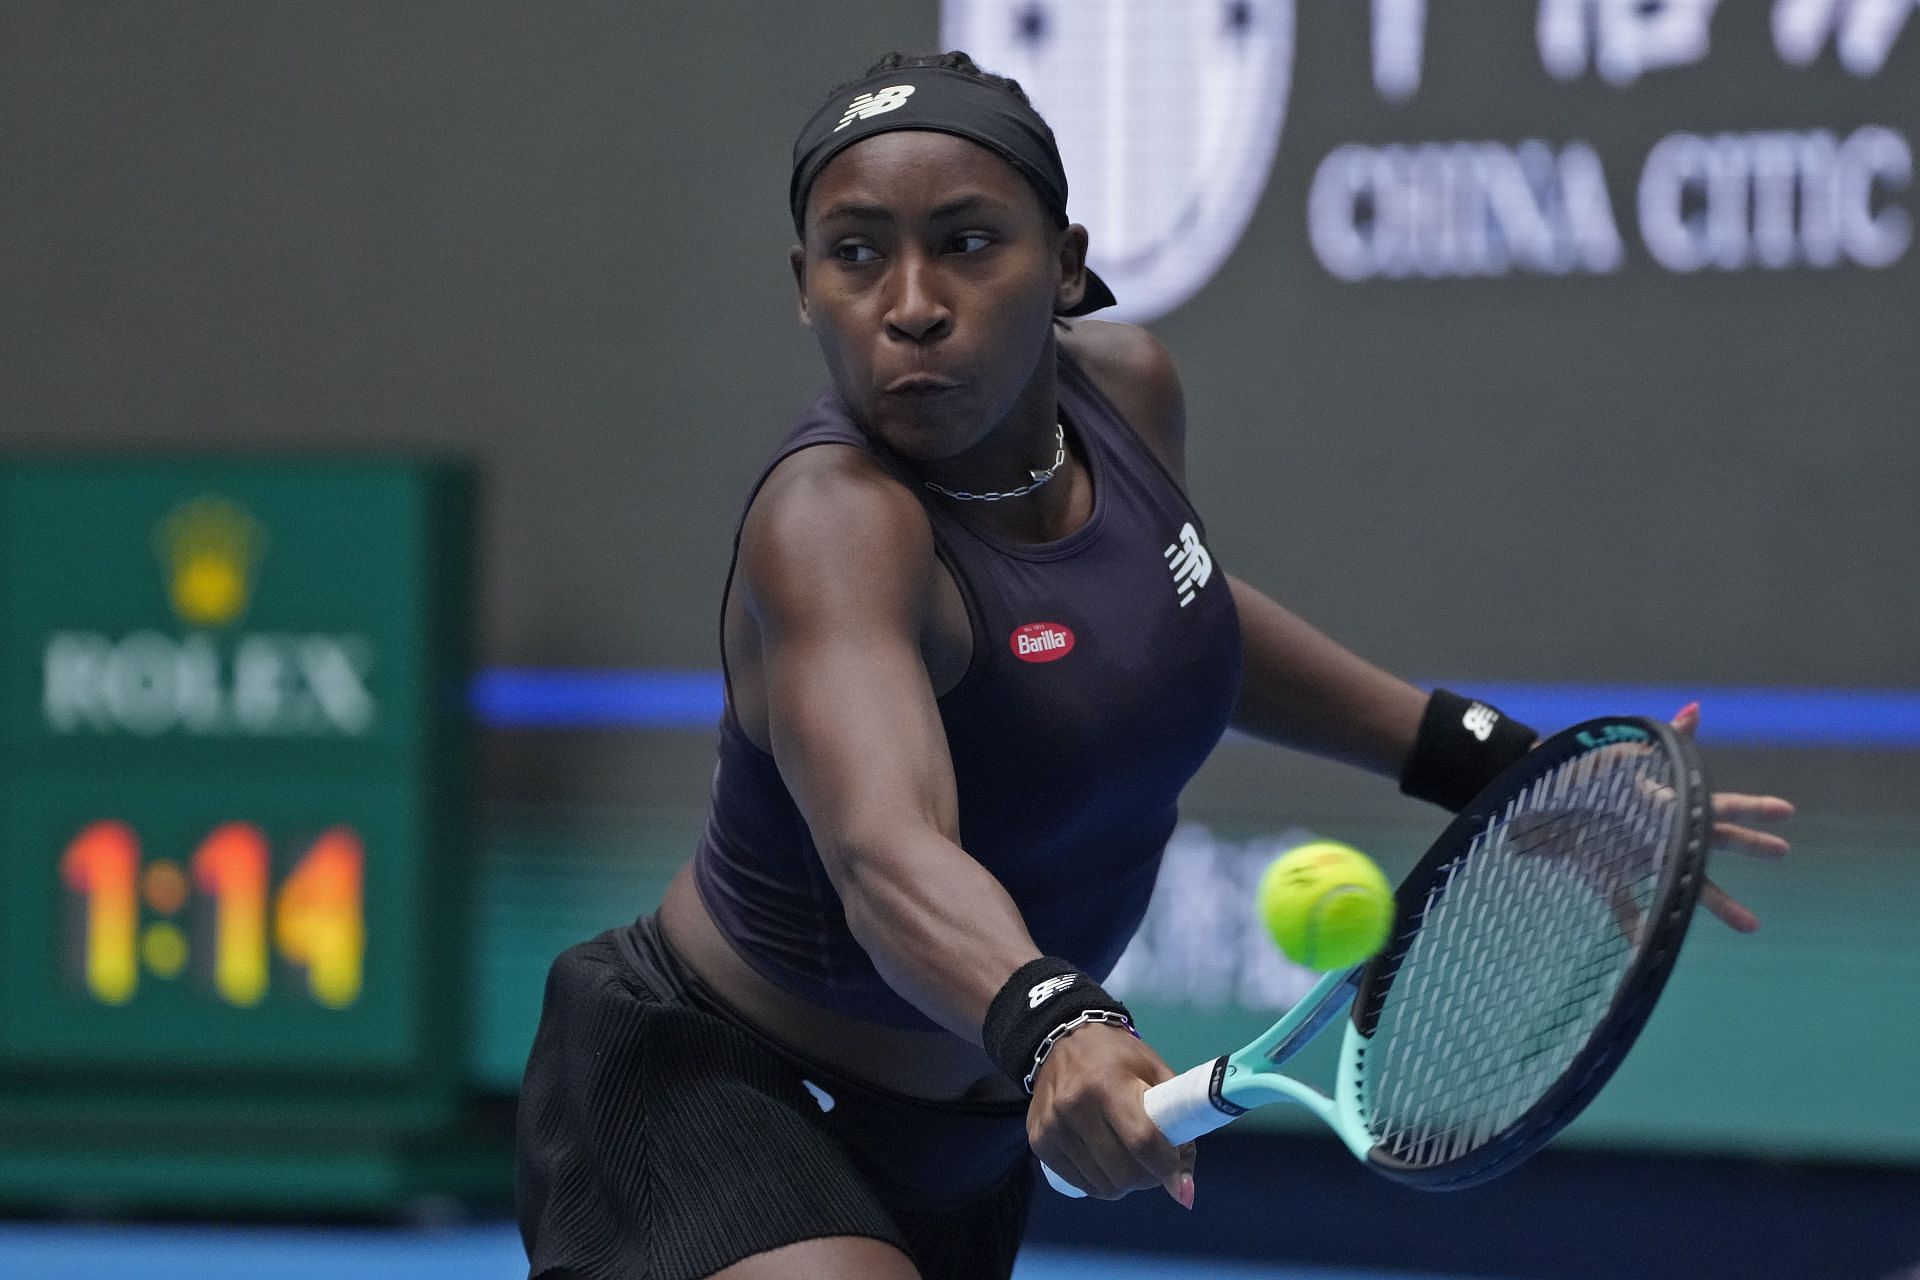 Gauff at the China Open Tennis